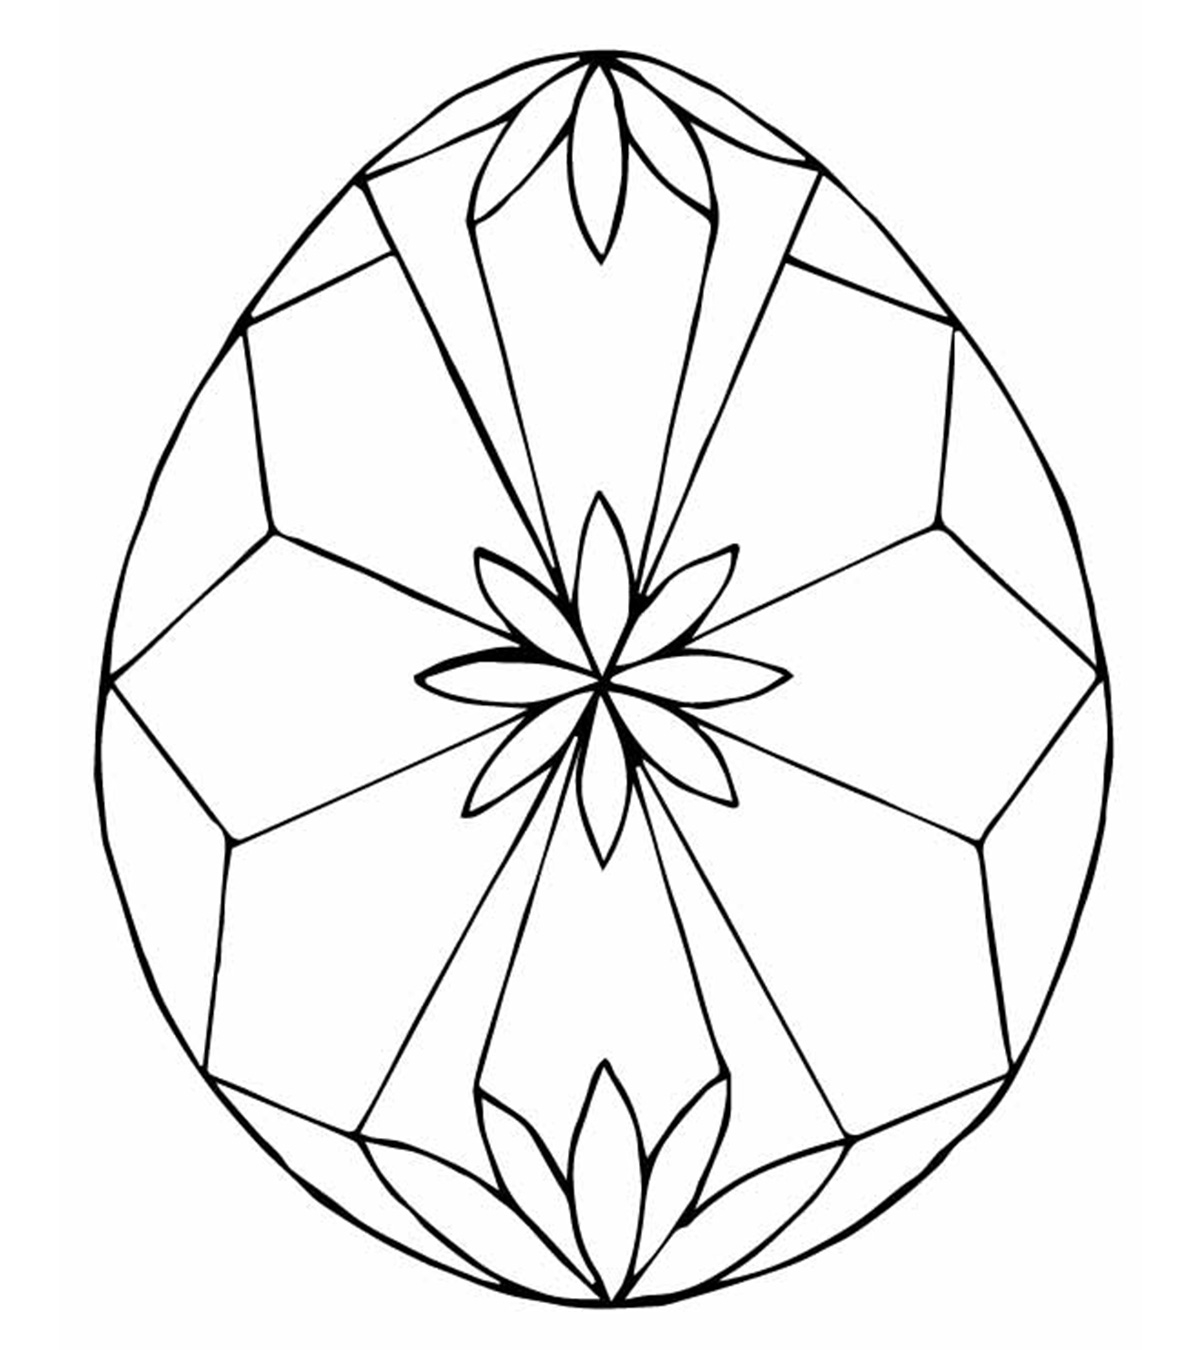 Coloring Pages Of Diamonds Top 10 Free Printable Diamond Coloring Pages Online